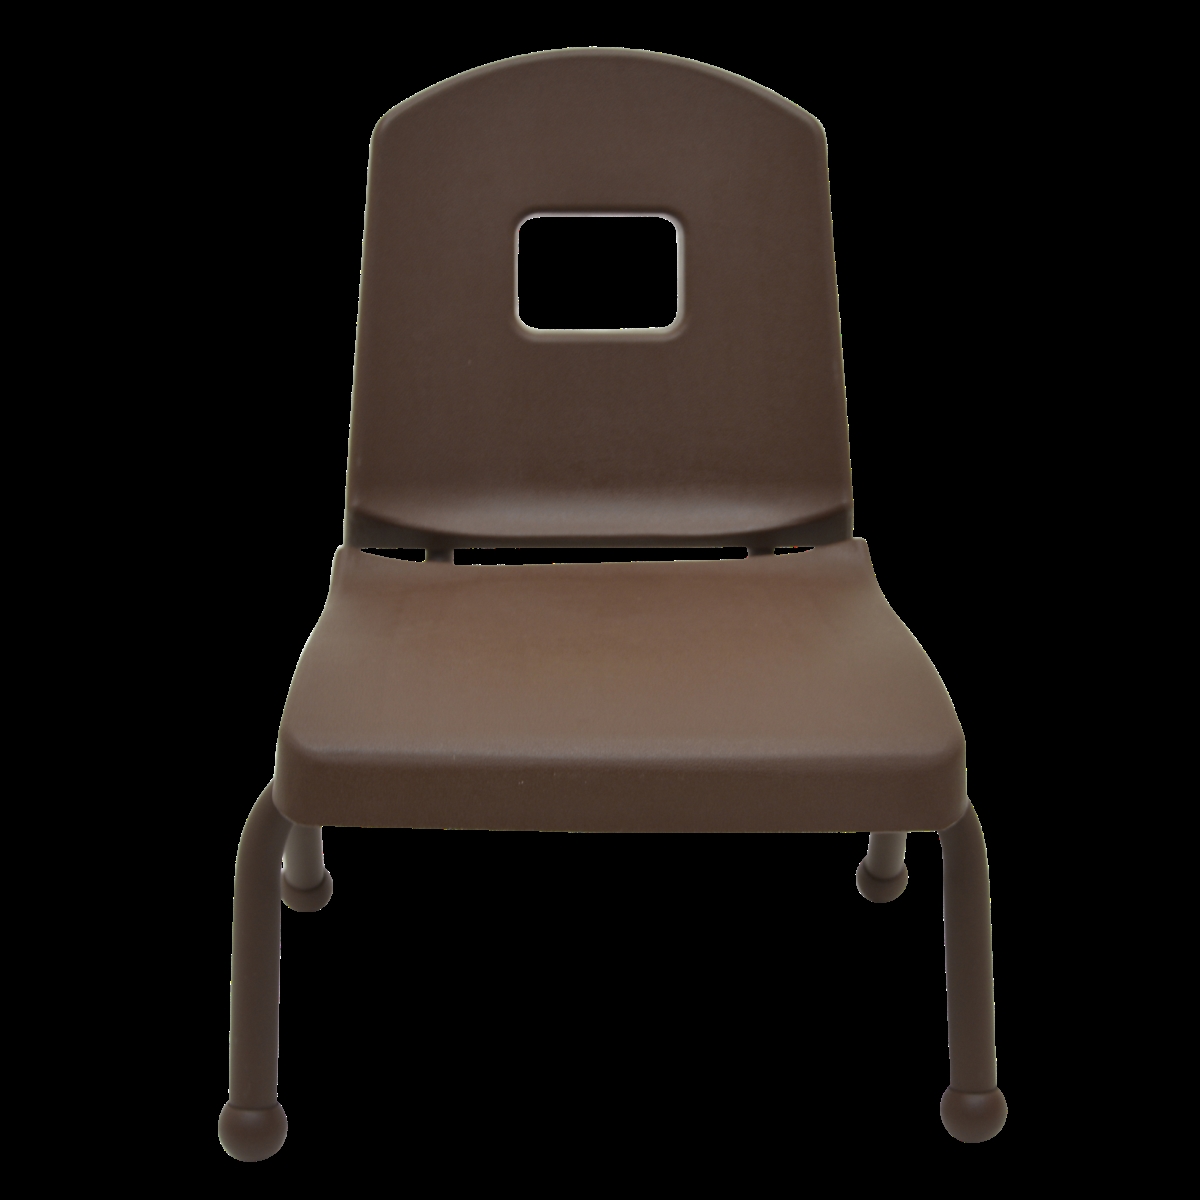 10chrb-bn-5pk 10 In. Creative Color Split Bucket Chair With Matching Ball Glide In Brown - Pack Of 5